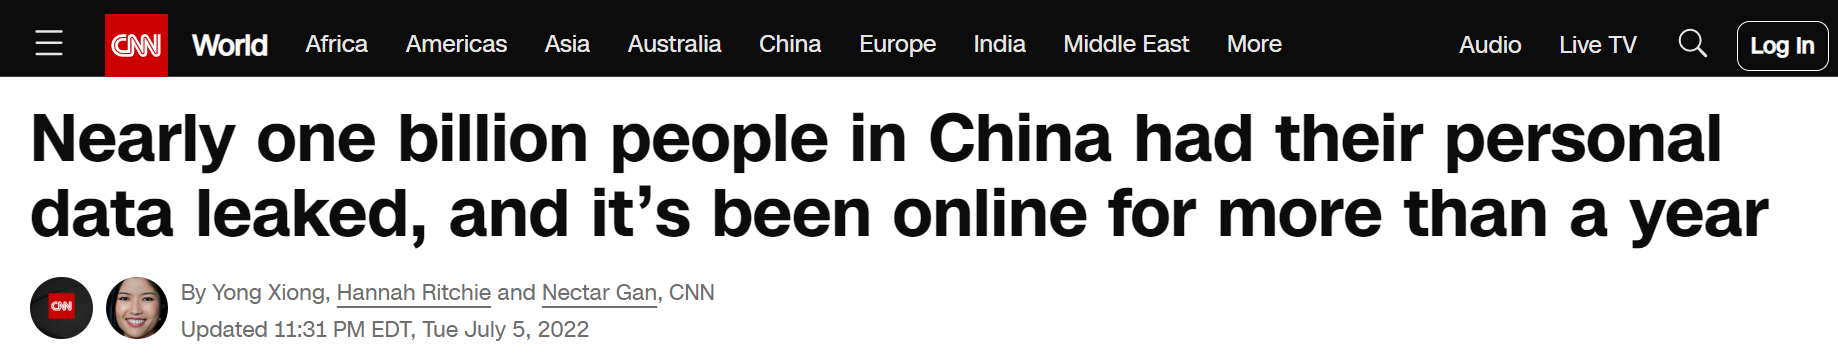 Shanghai&#39;s police database is for sale in what could be China’s biggest ever data breach. China is home to 1.4 billion people, which means the data breach could potentially affect more than 70% of the population.